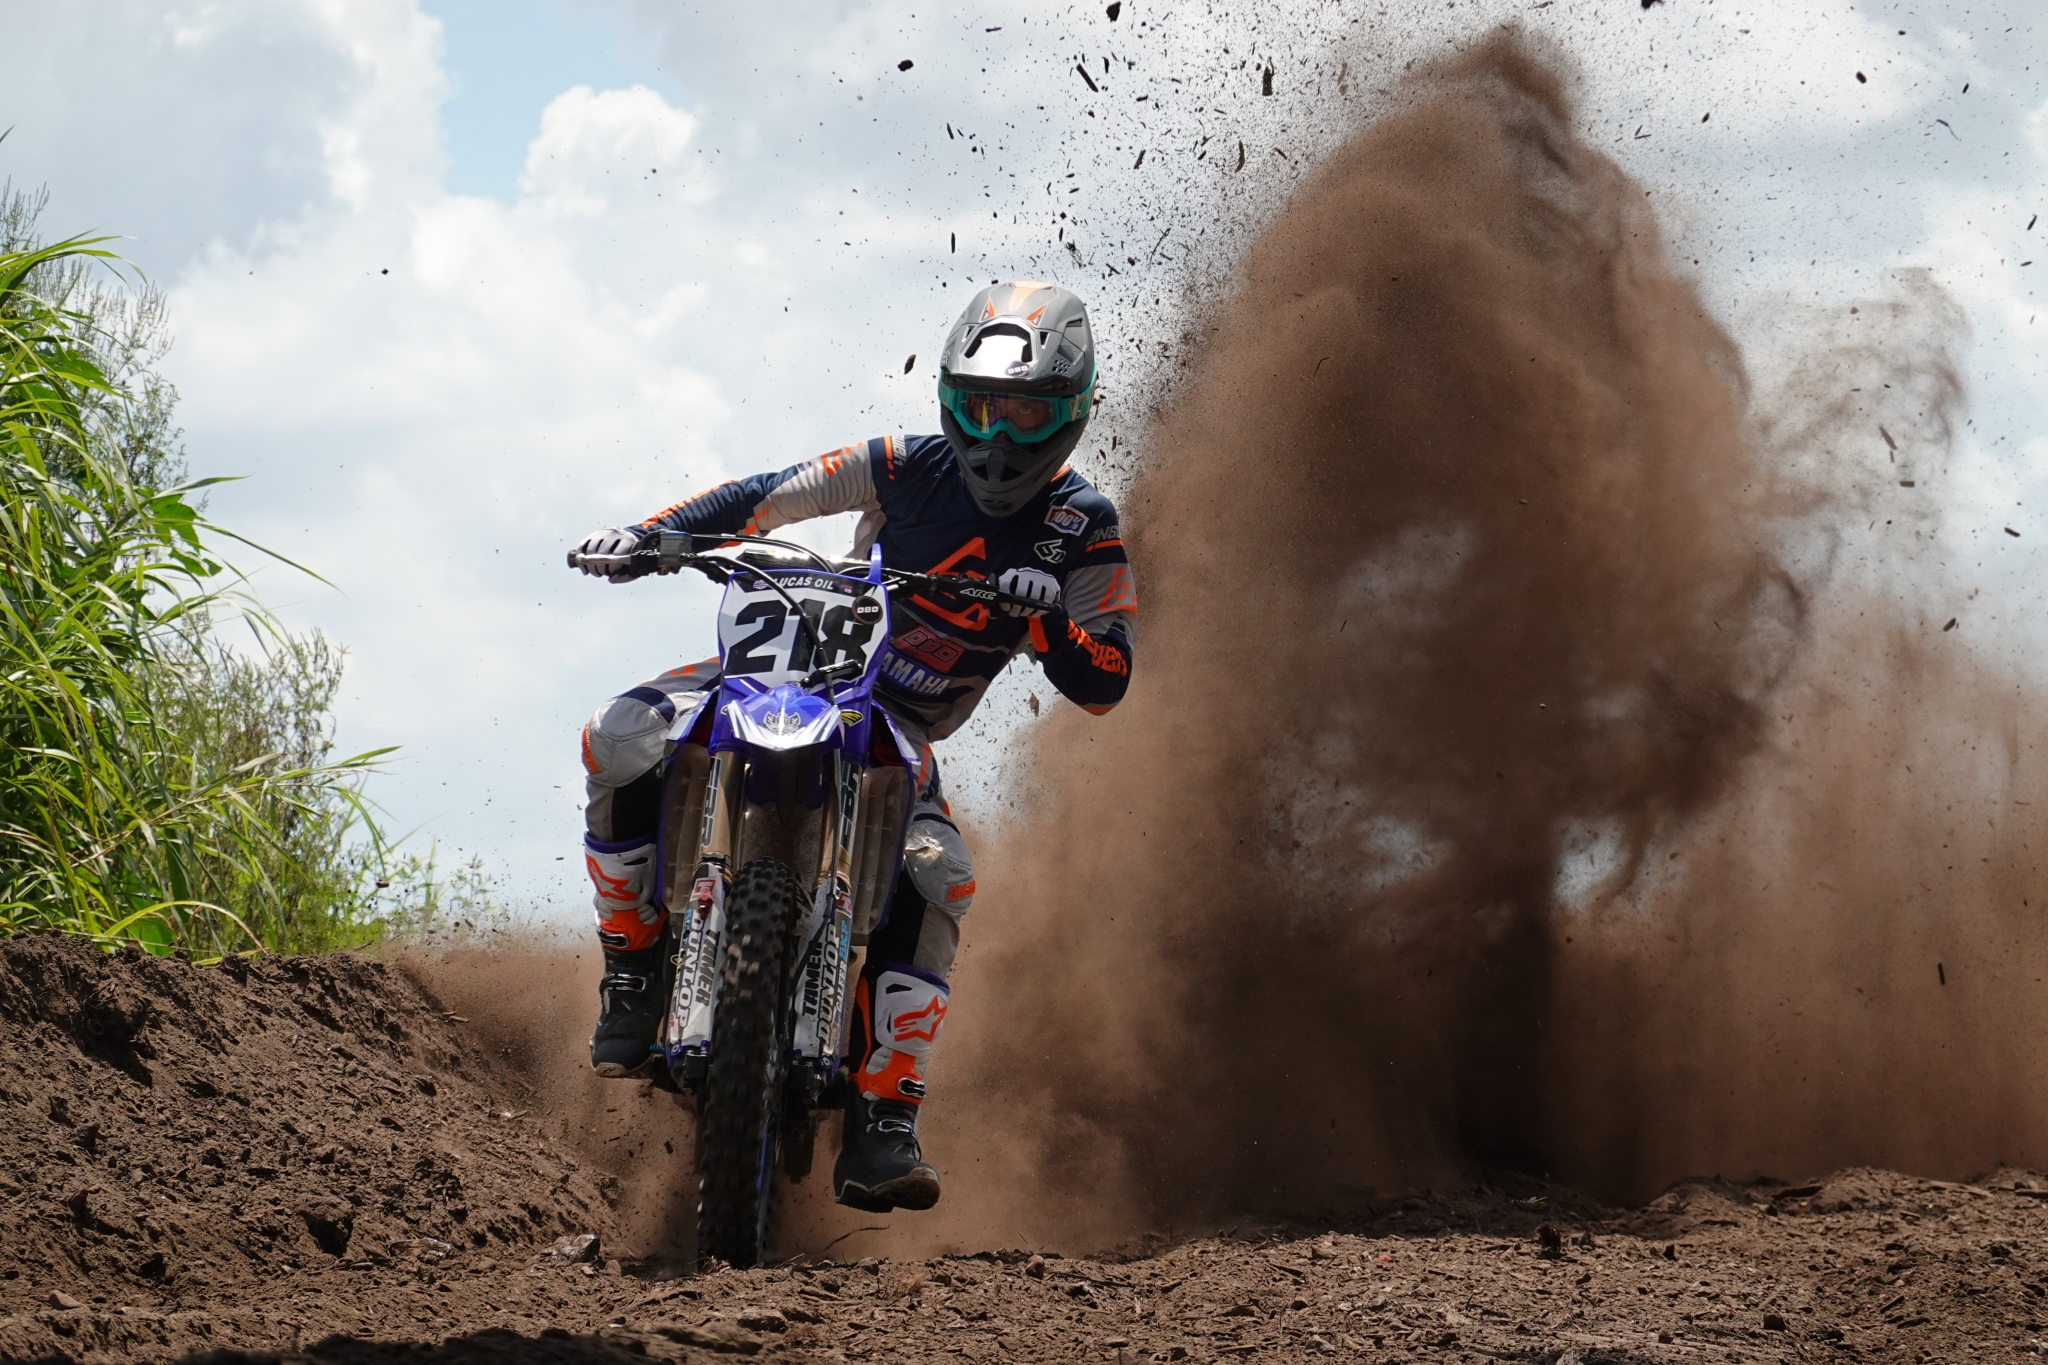 Motorcyclist riding through dirt, churning up a dust cloud behind the motorbike